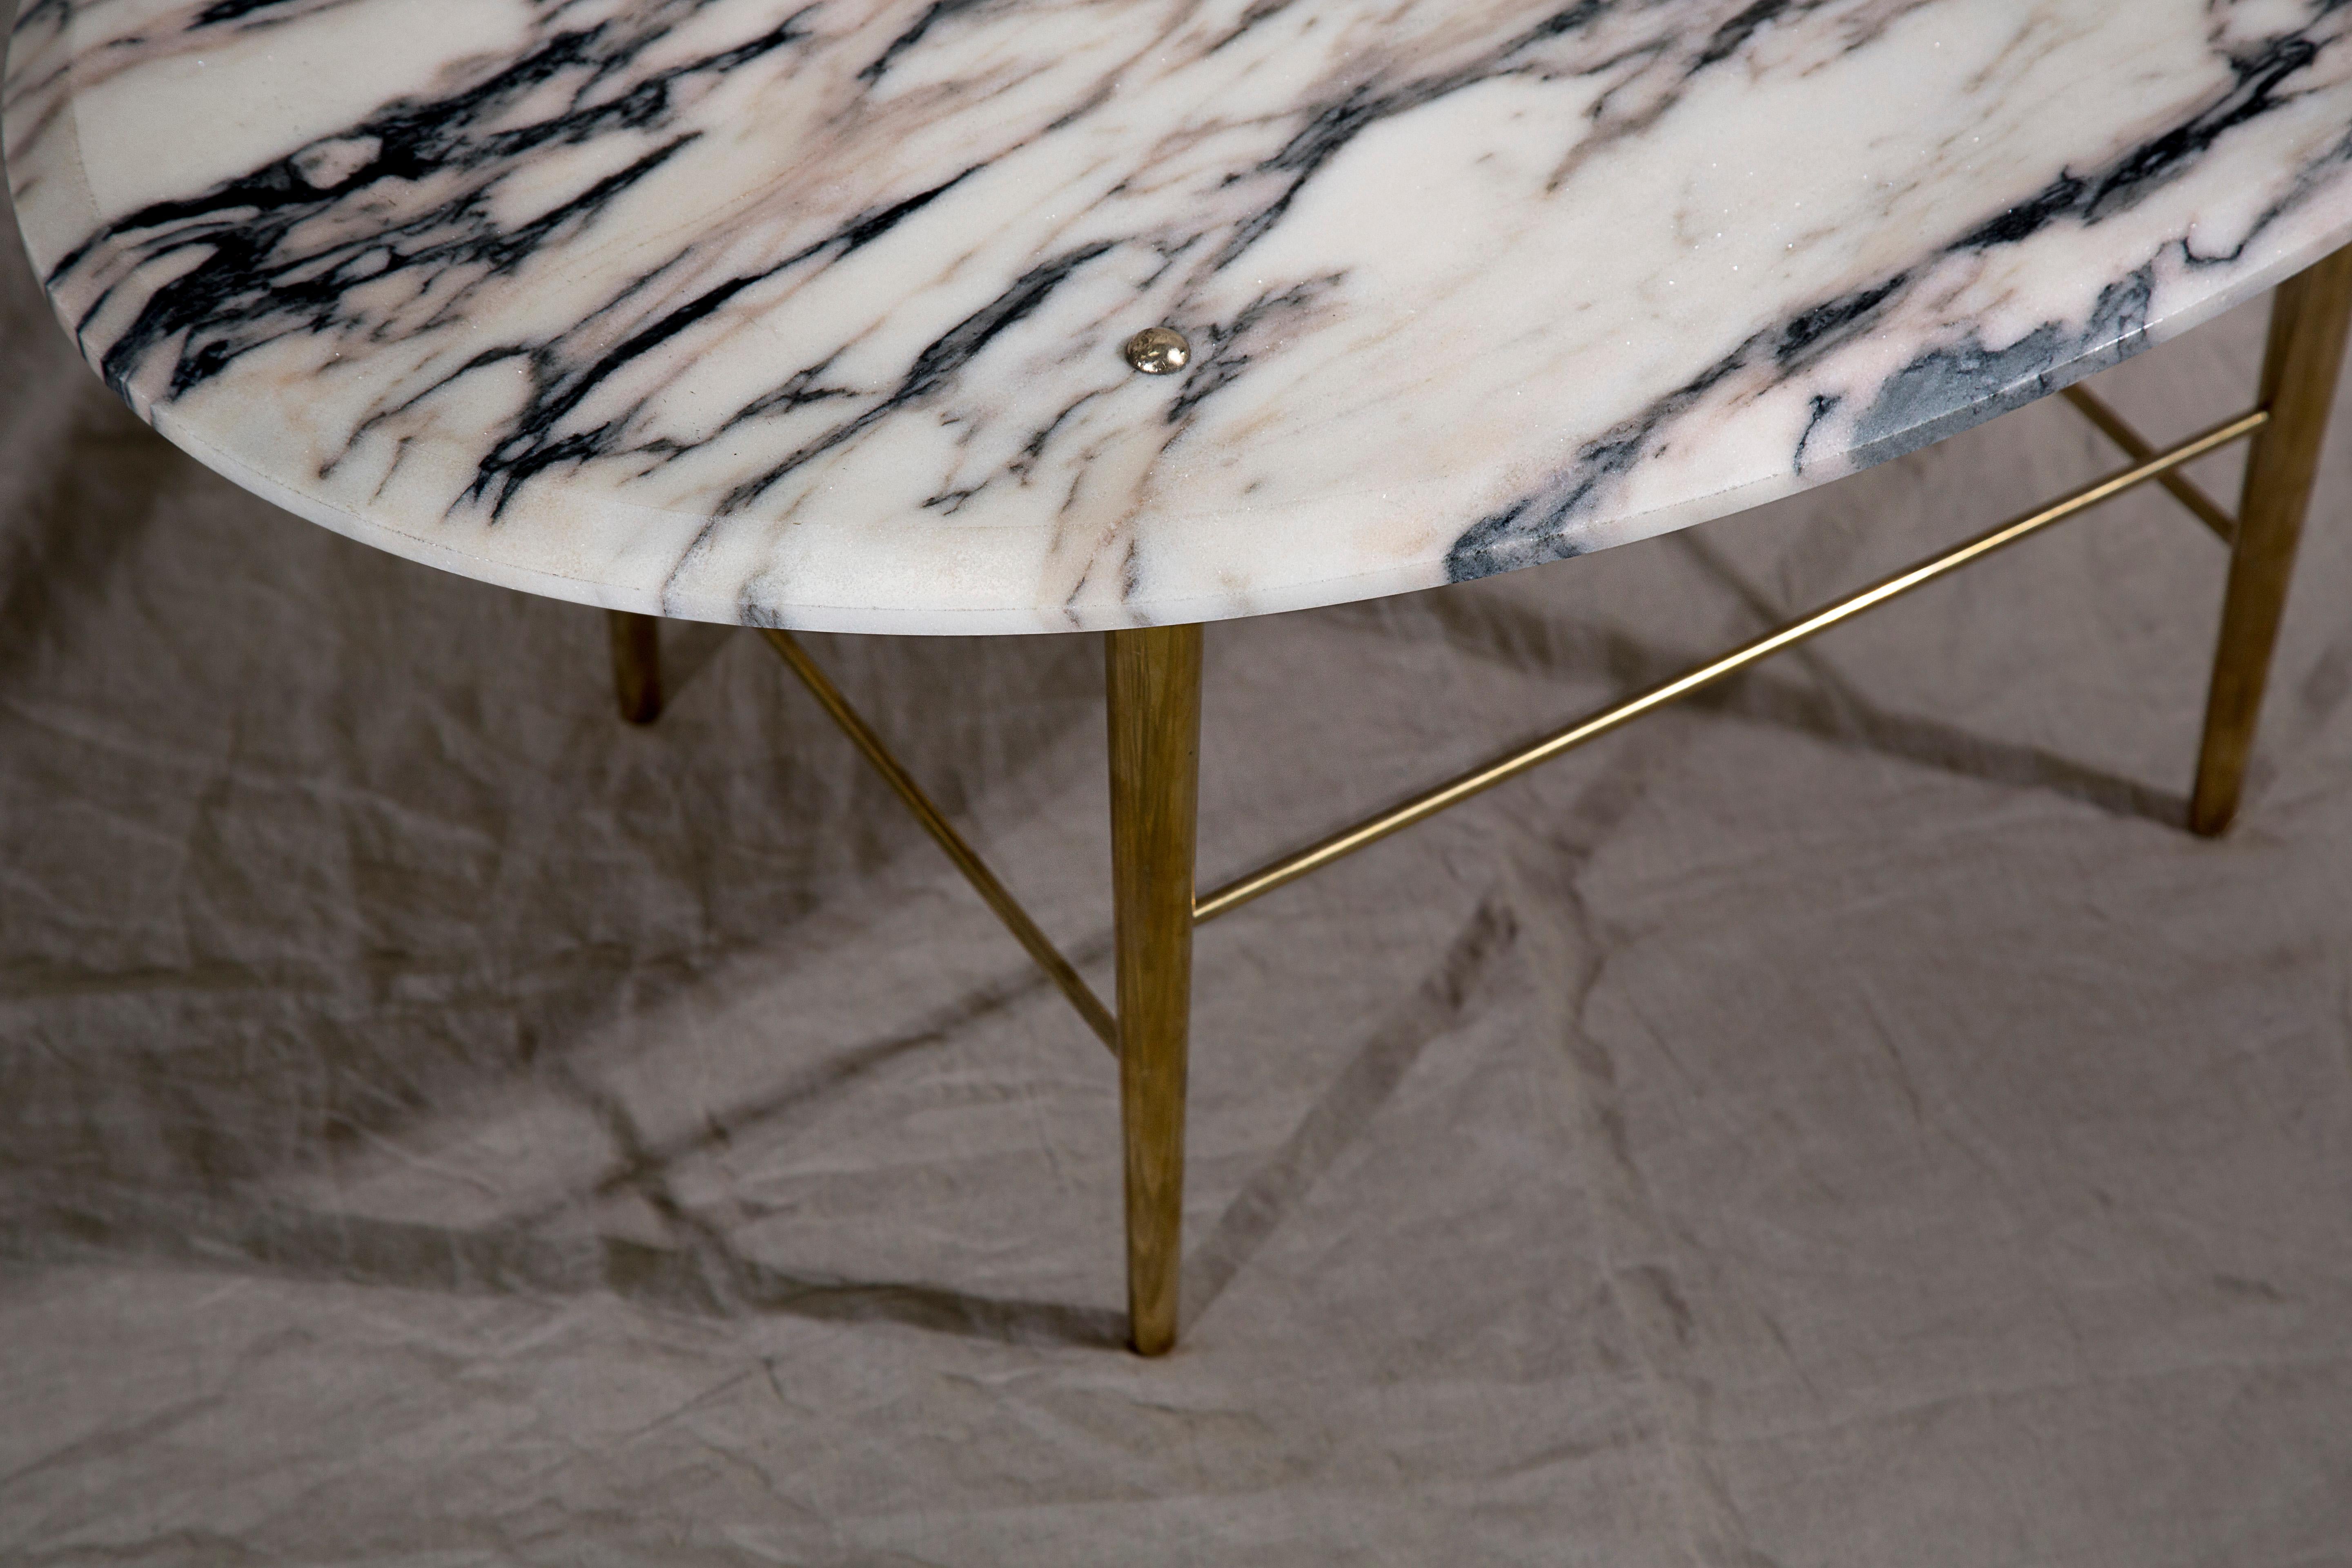 Modern Stud Coffee Table in Vulcanatta Marble and Polished Brass — Small For Sale